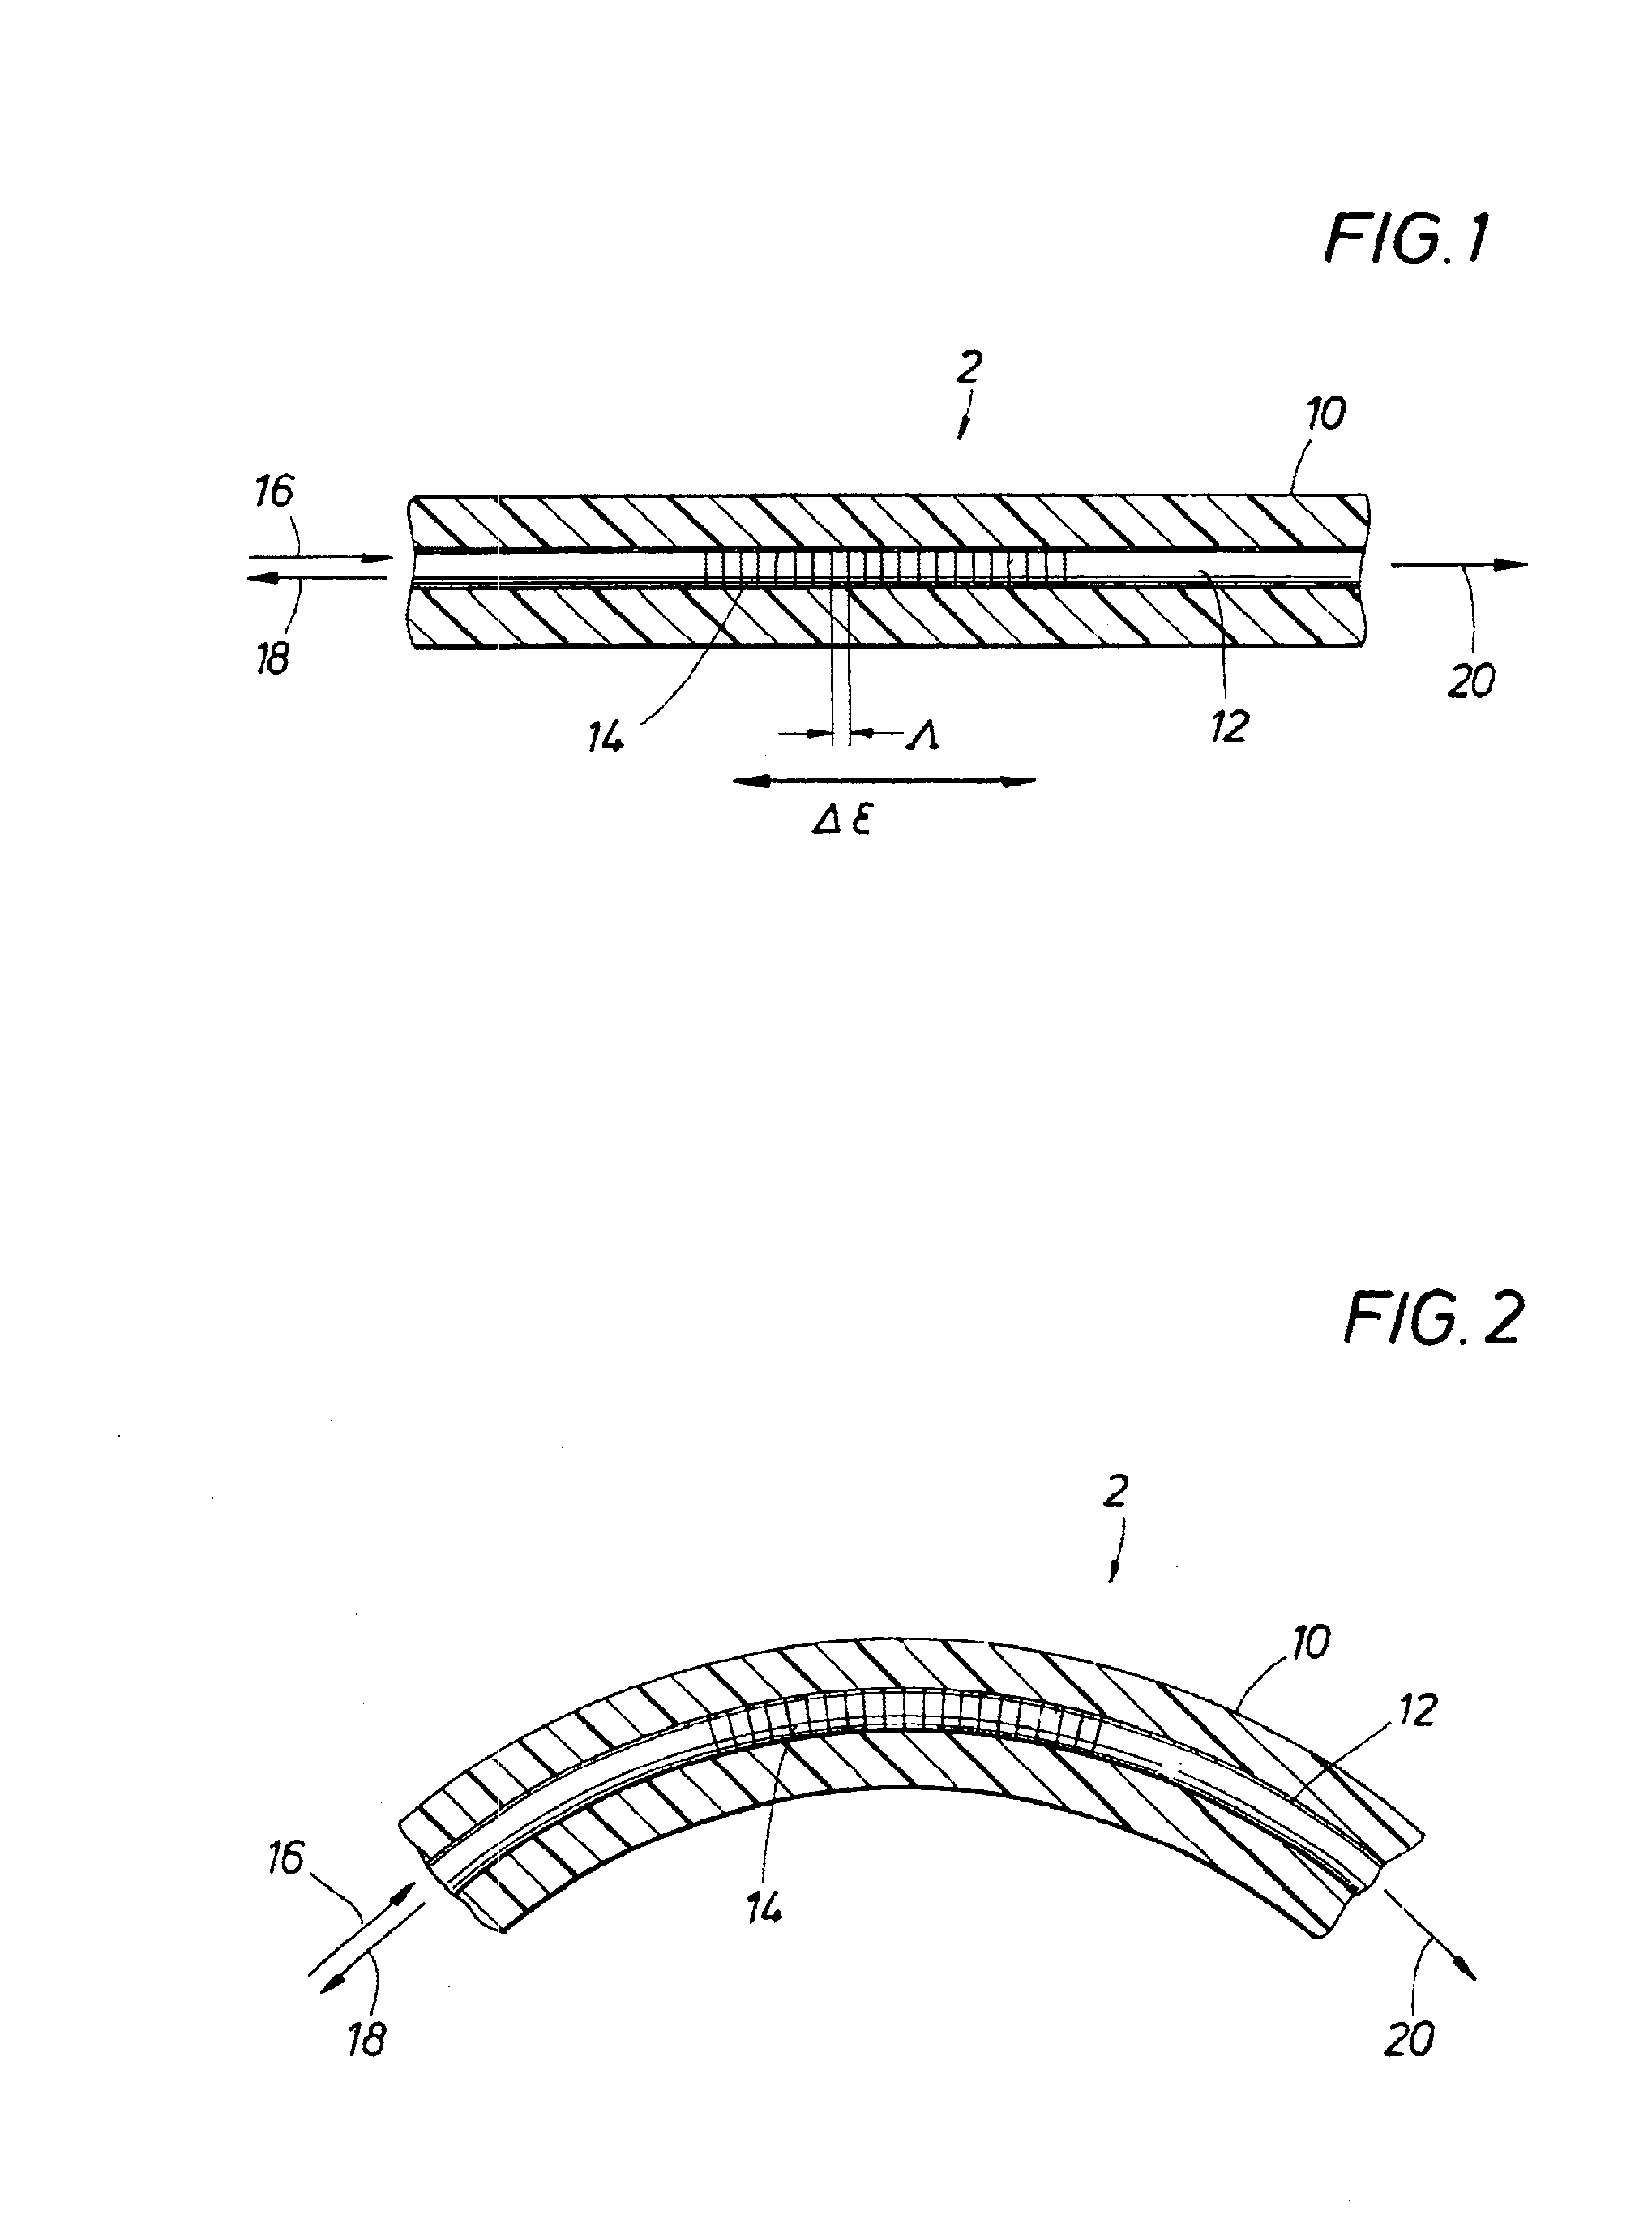 Apparatus and method for monitoring compaction